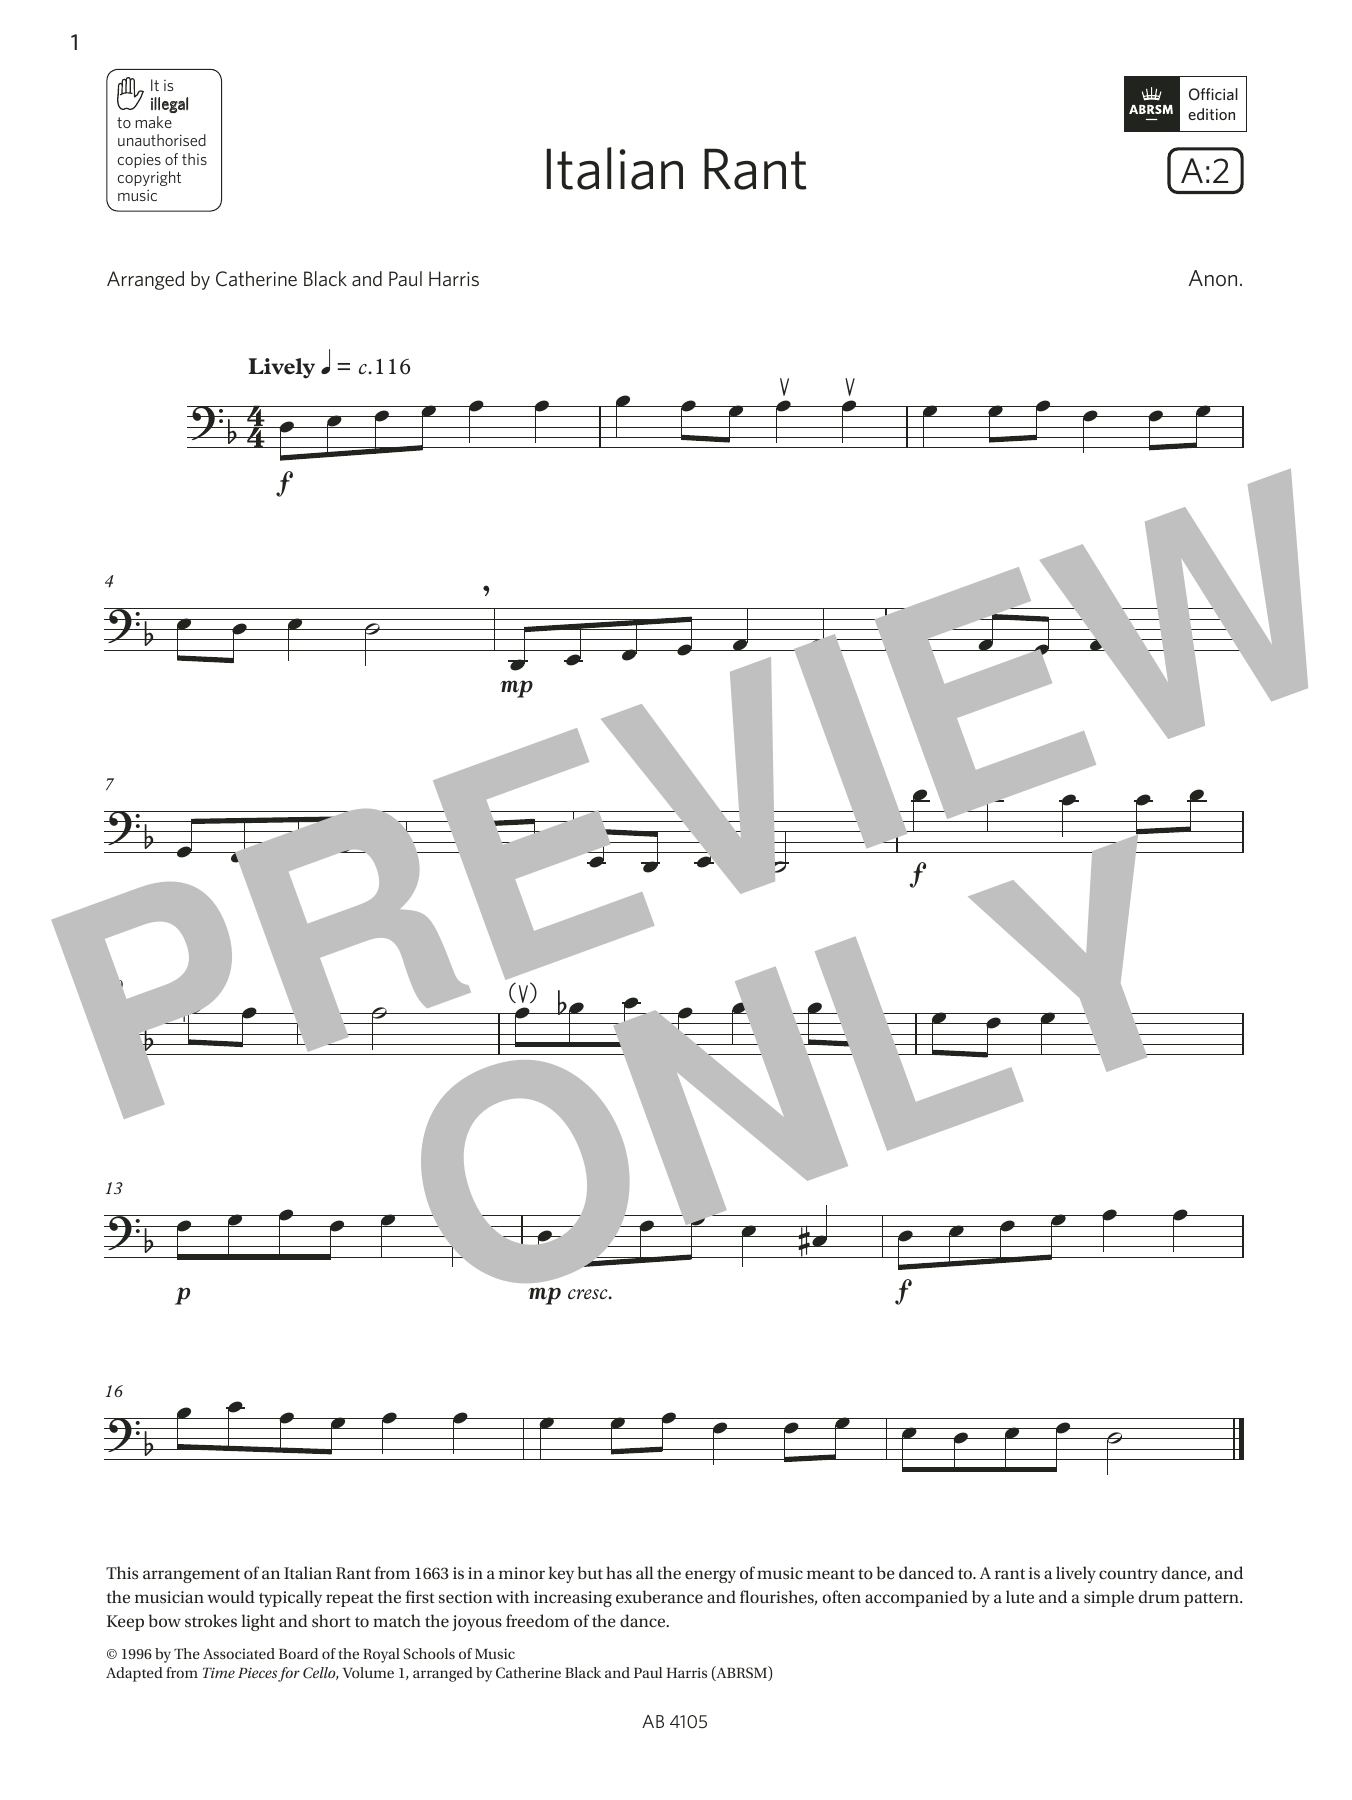 Download Anon. Italian Rant (Grade 2, A2, from the ABR Sheet Music